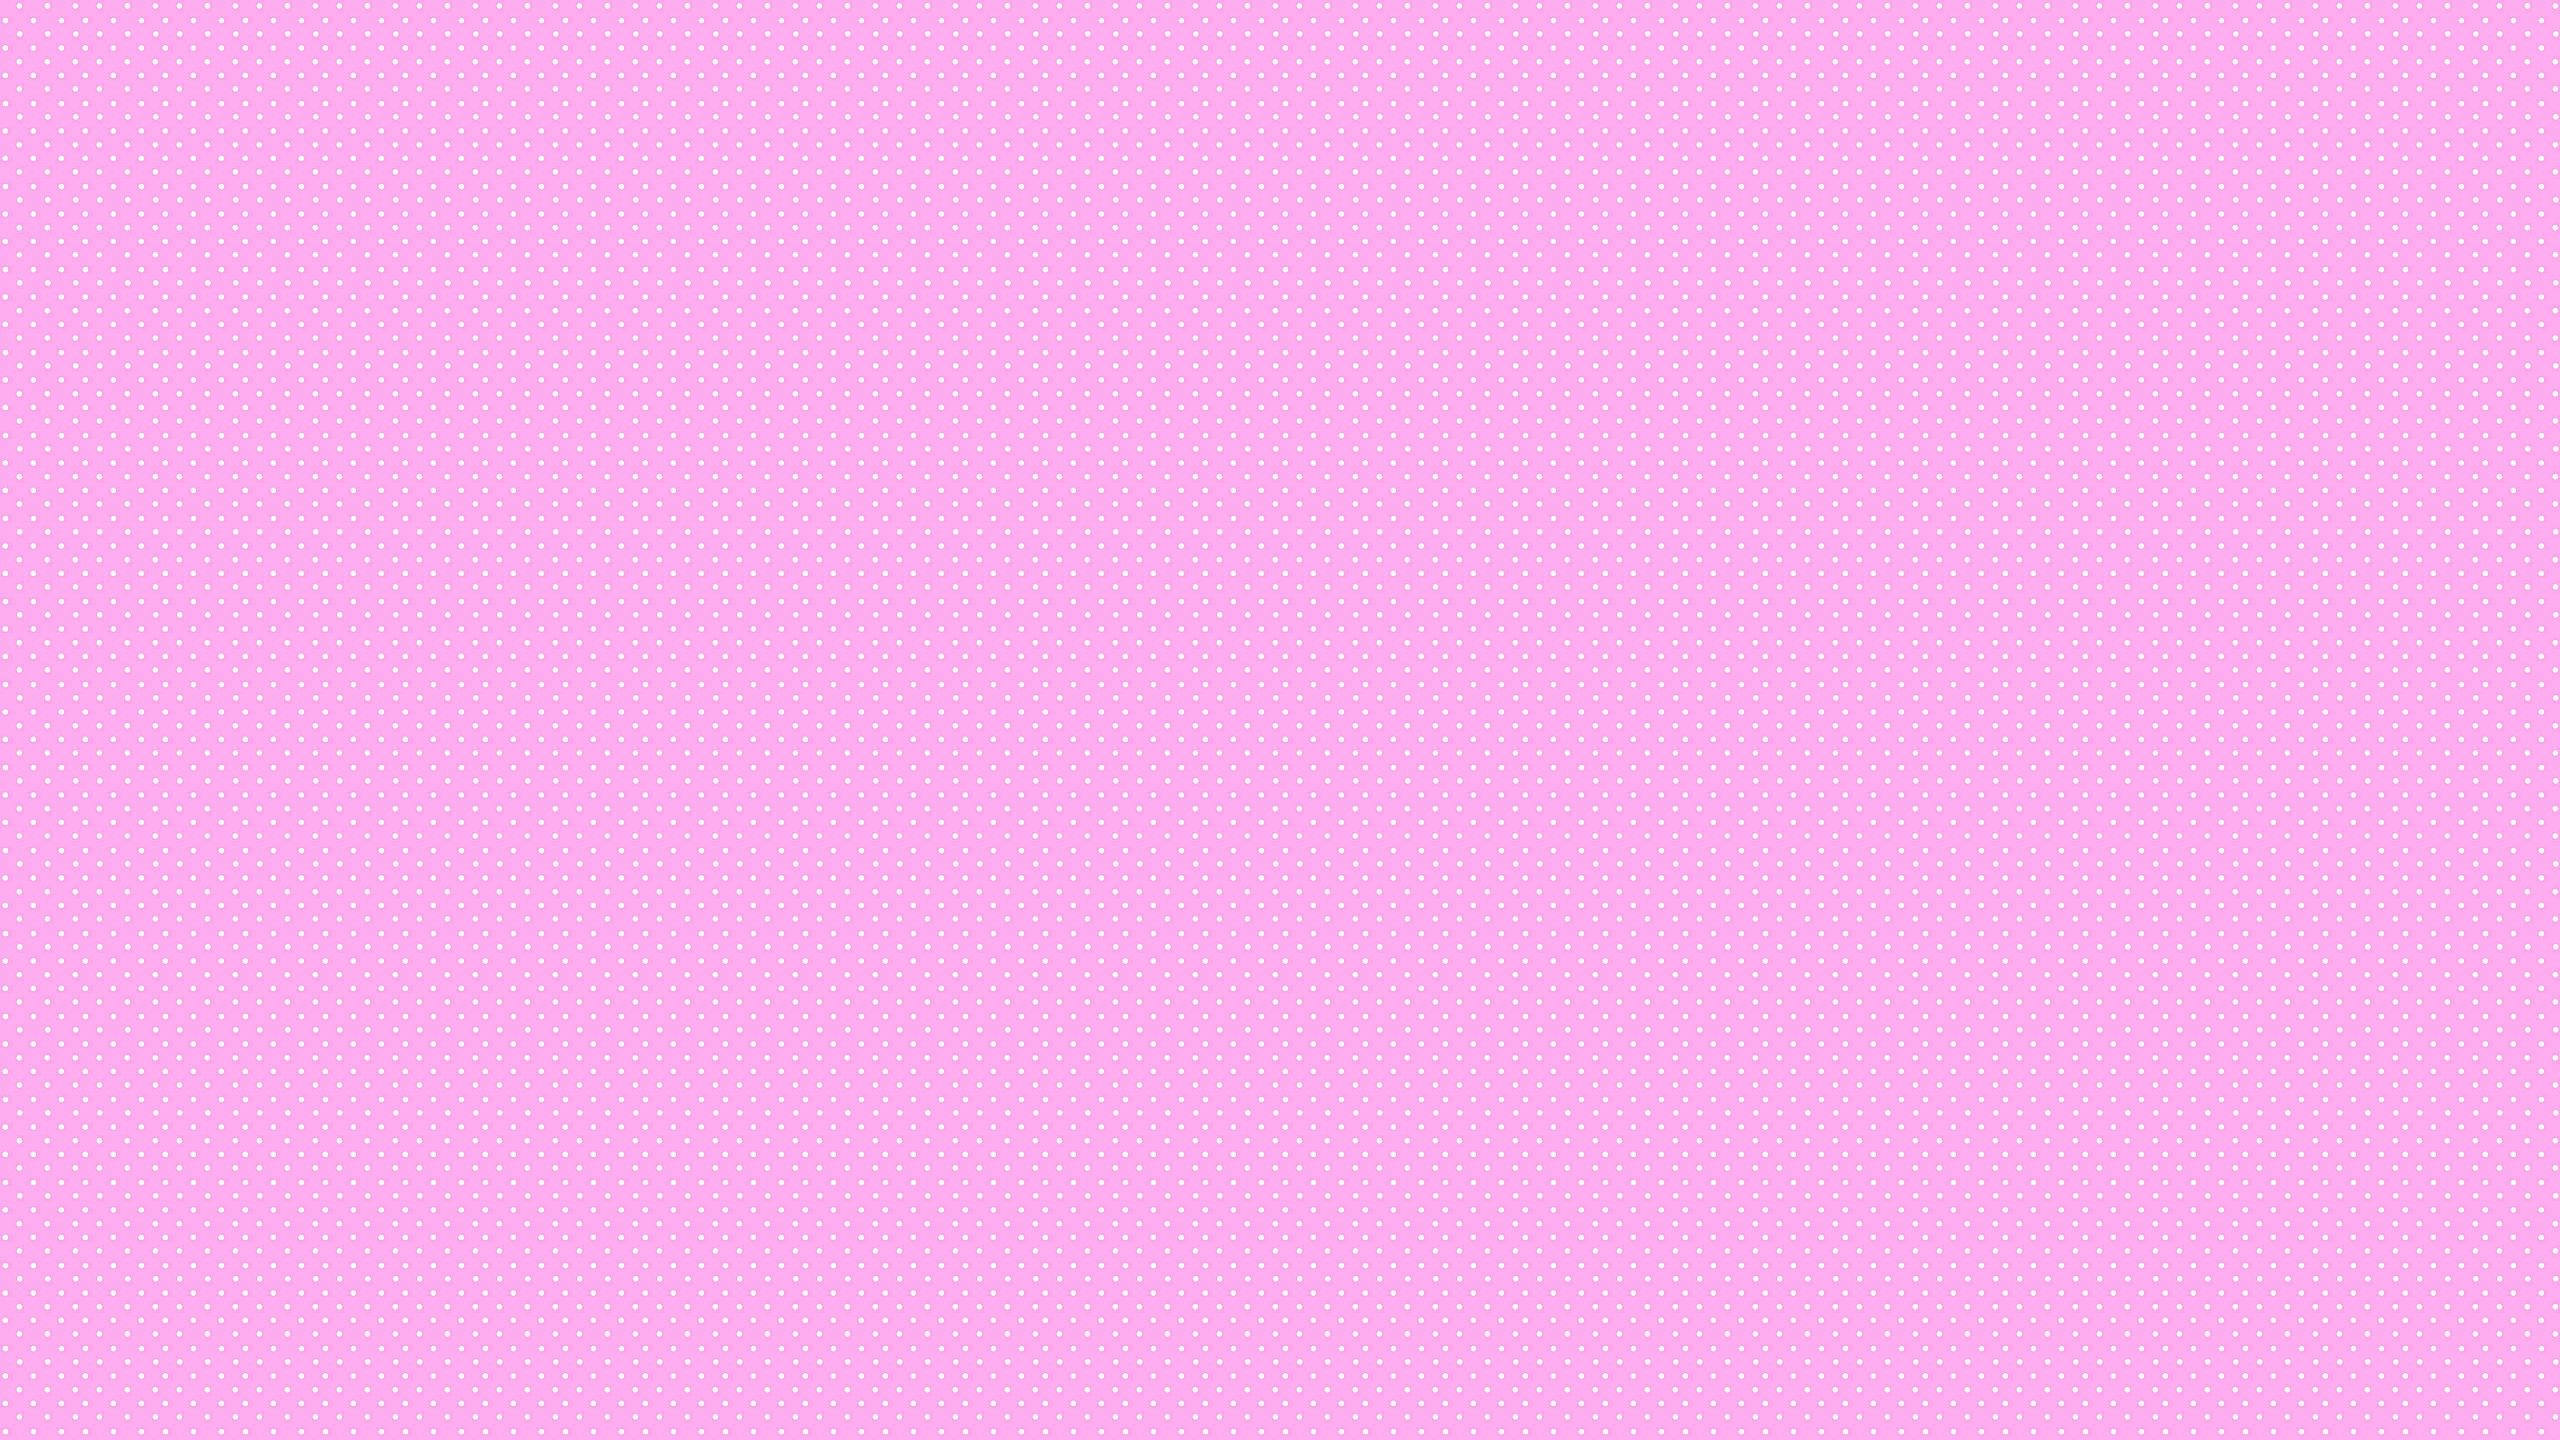 Download Aesthetic Youtube Pink With White Dots Wallpaper | Wallpapers.com